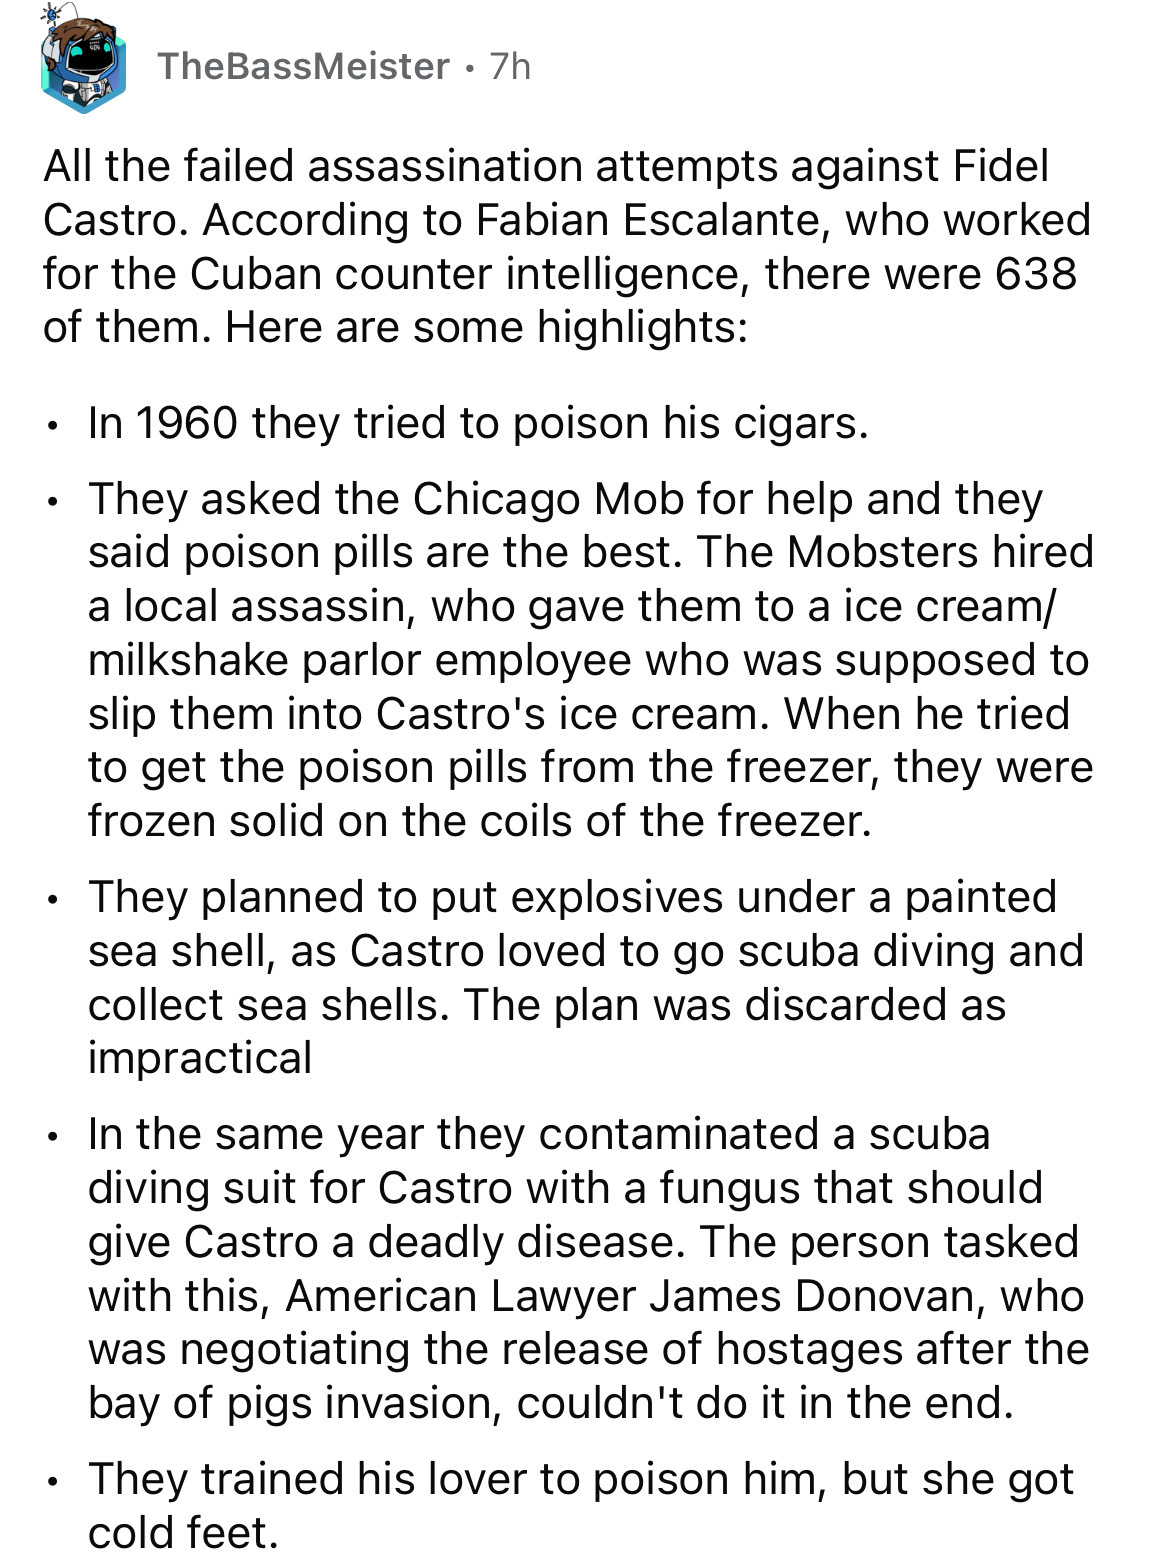 document - TheBassMeister 7h All the failed assassination attempts against Fidel Castro. According to Fabian Escalante, who worked for the Cuban counter intelligence, there were 638 of them. Here are some highlights In 1960 they tried to poison his cigars